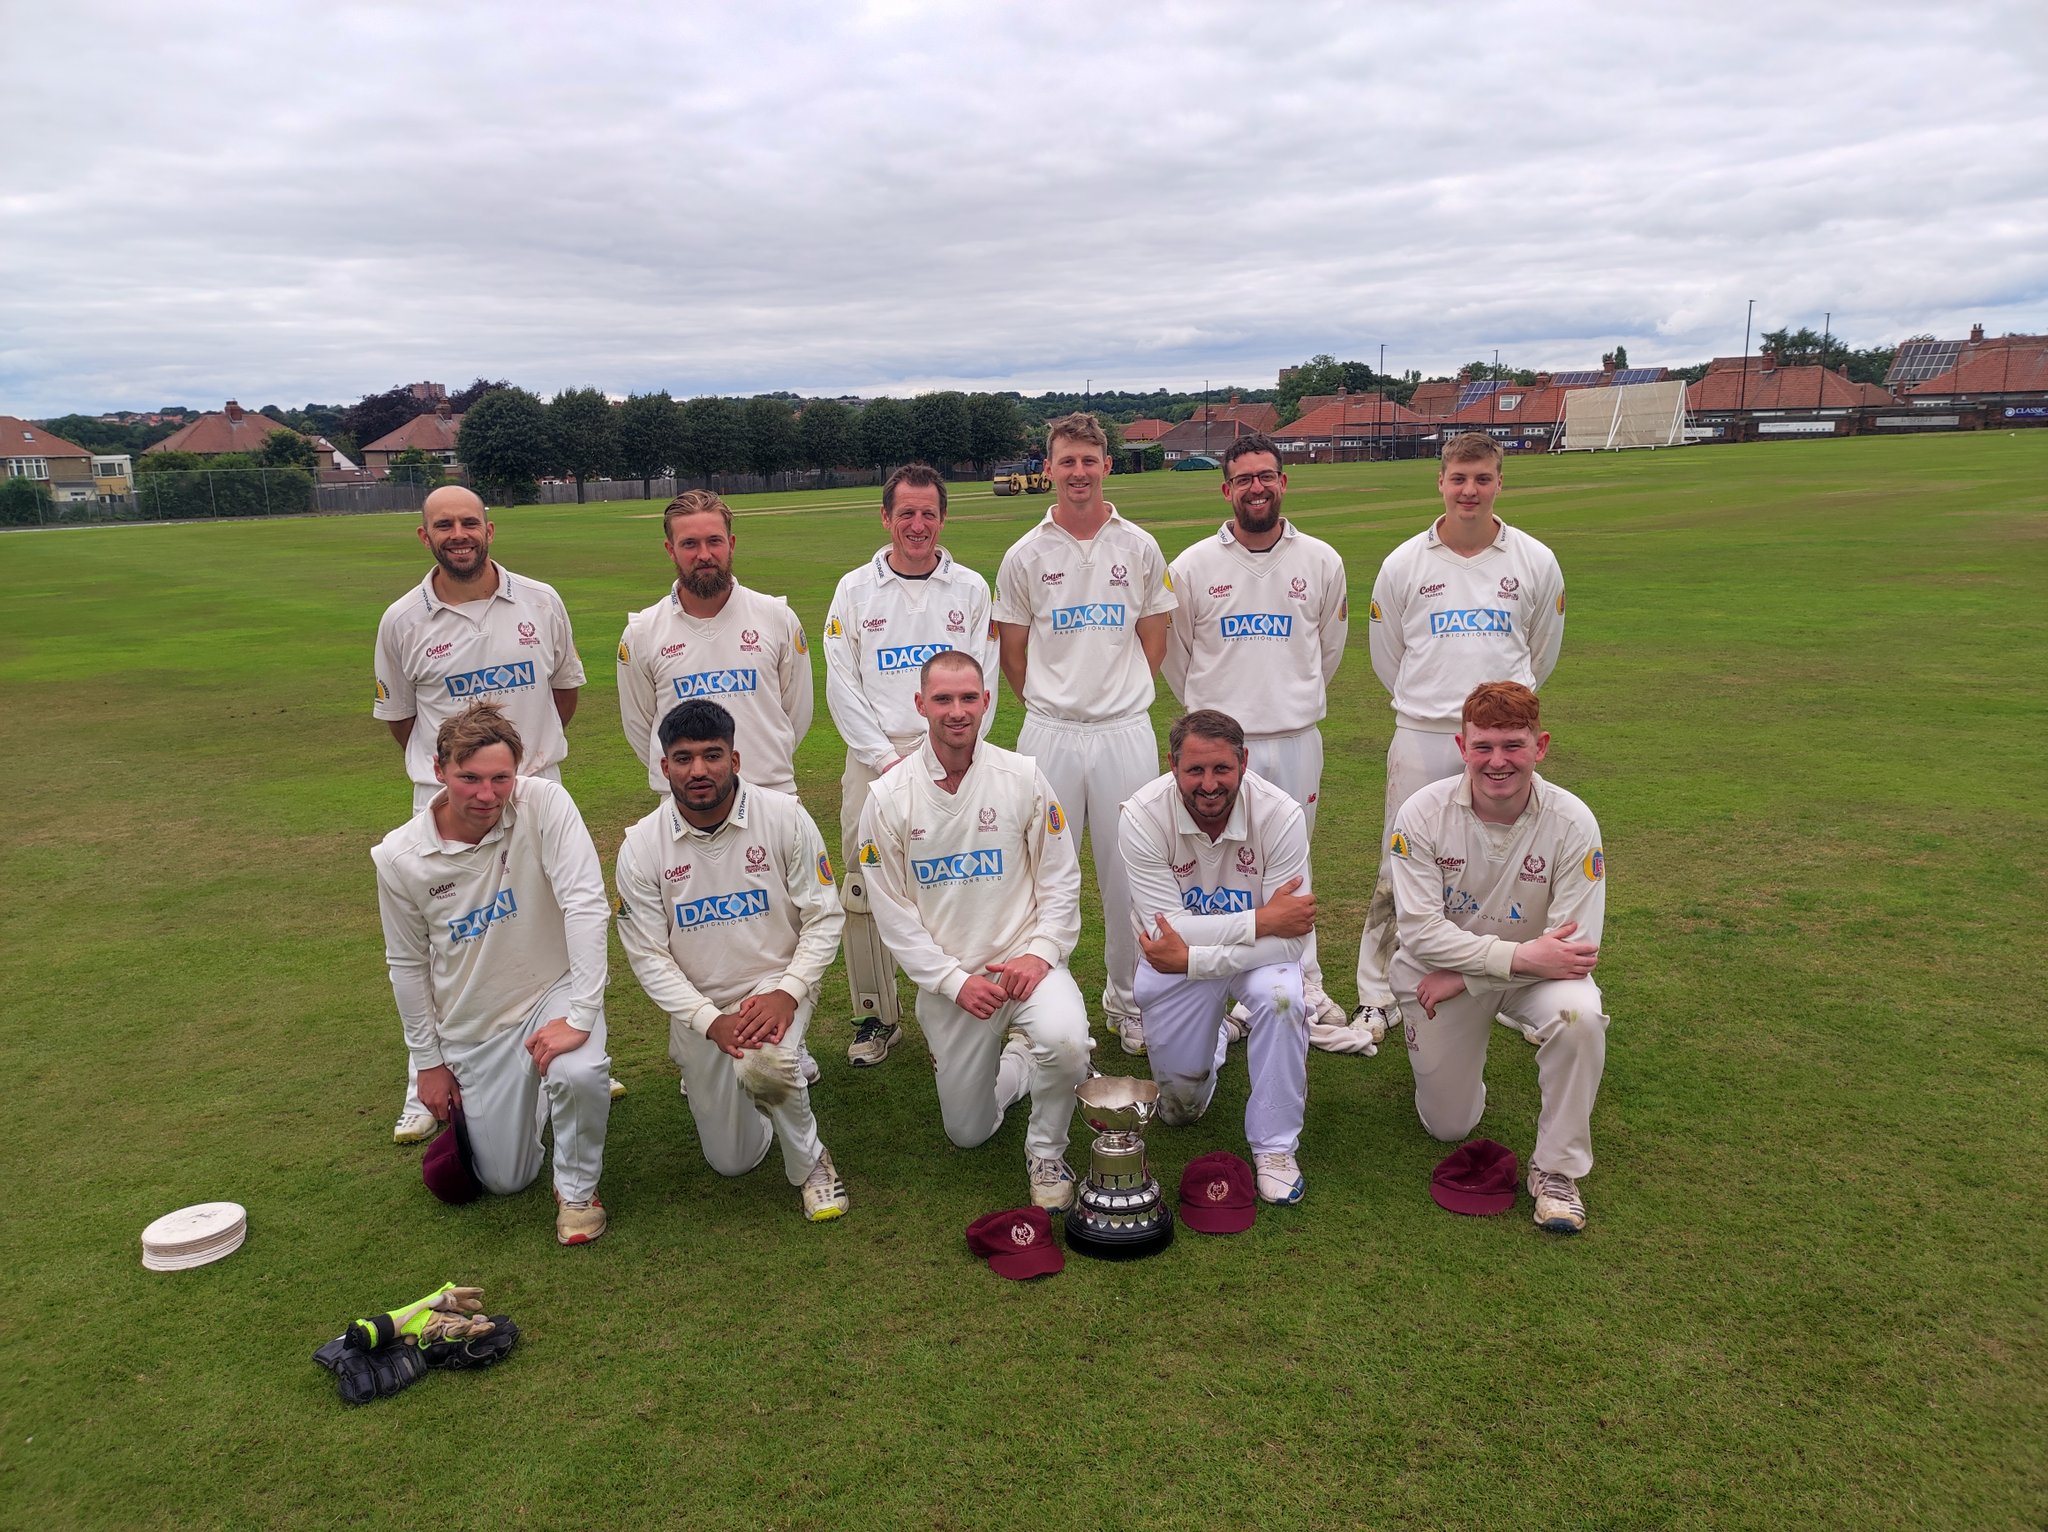 Hill win the Tyneside Charity Bowl for the 12th time thanks to another Coetzer century